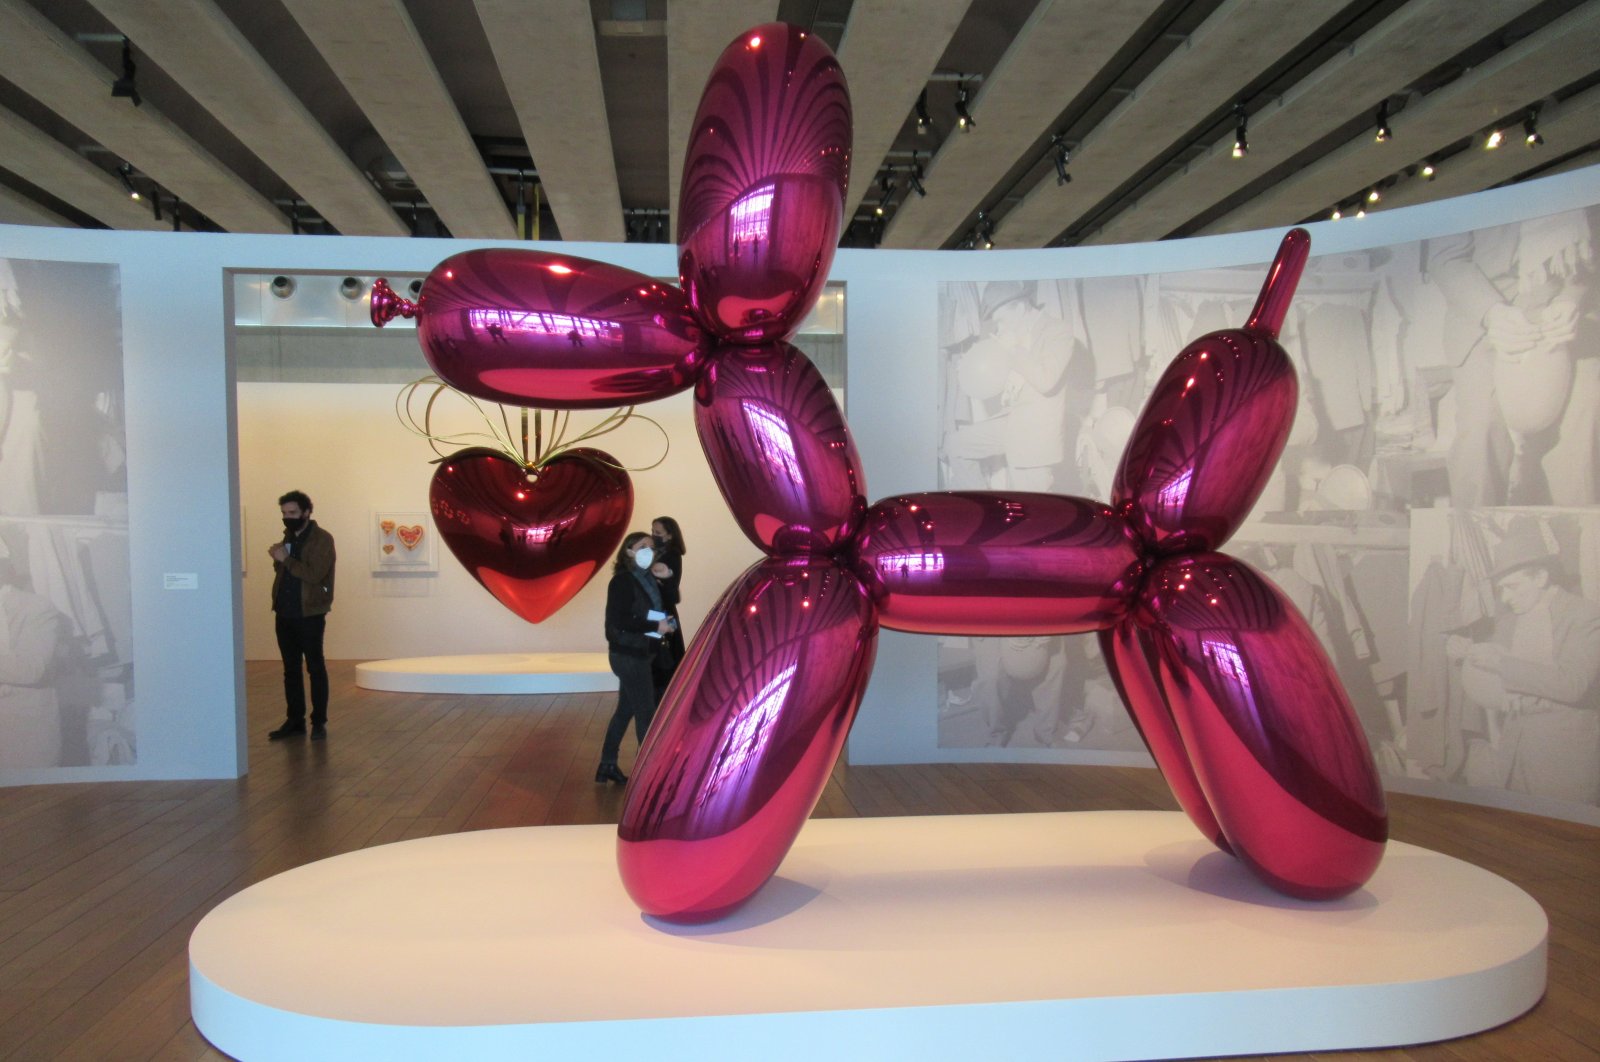 Jeff Koons' "Balloon Dog" is seen in the foreground while his "Hanging Heart" is in the background at the Mucem, Marseille, France. (DPA Photo)